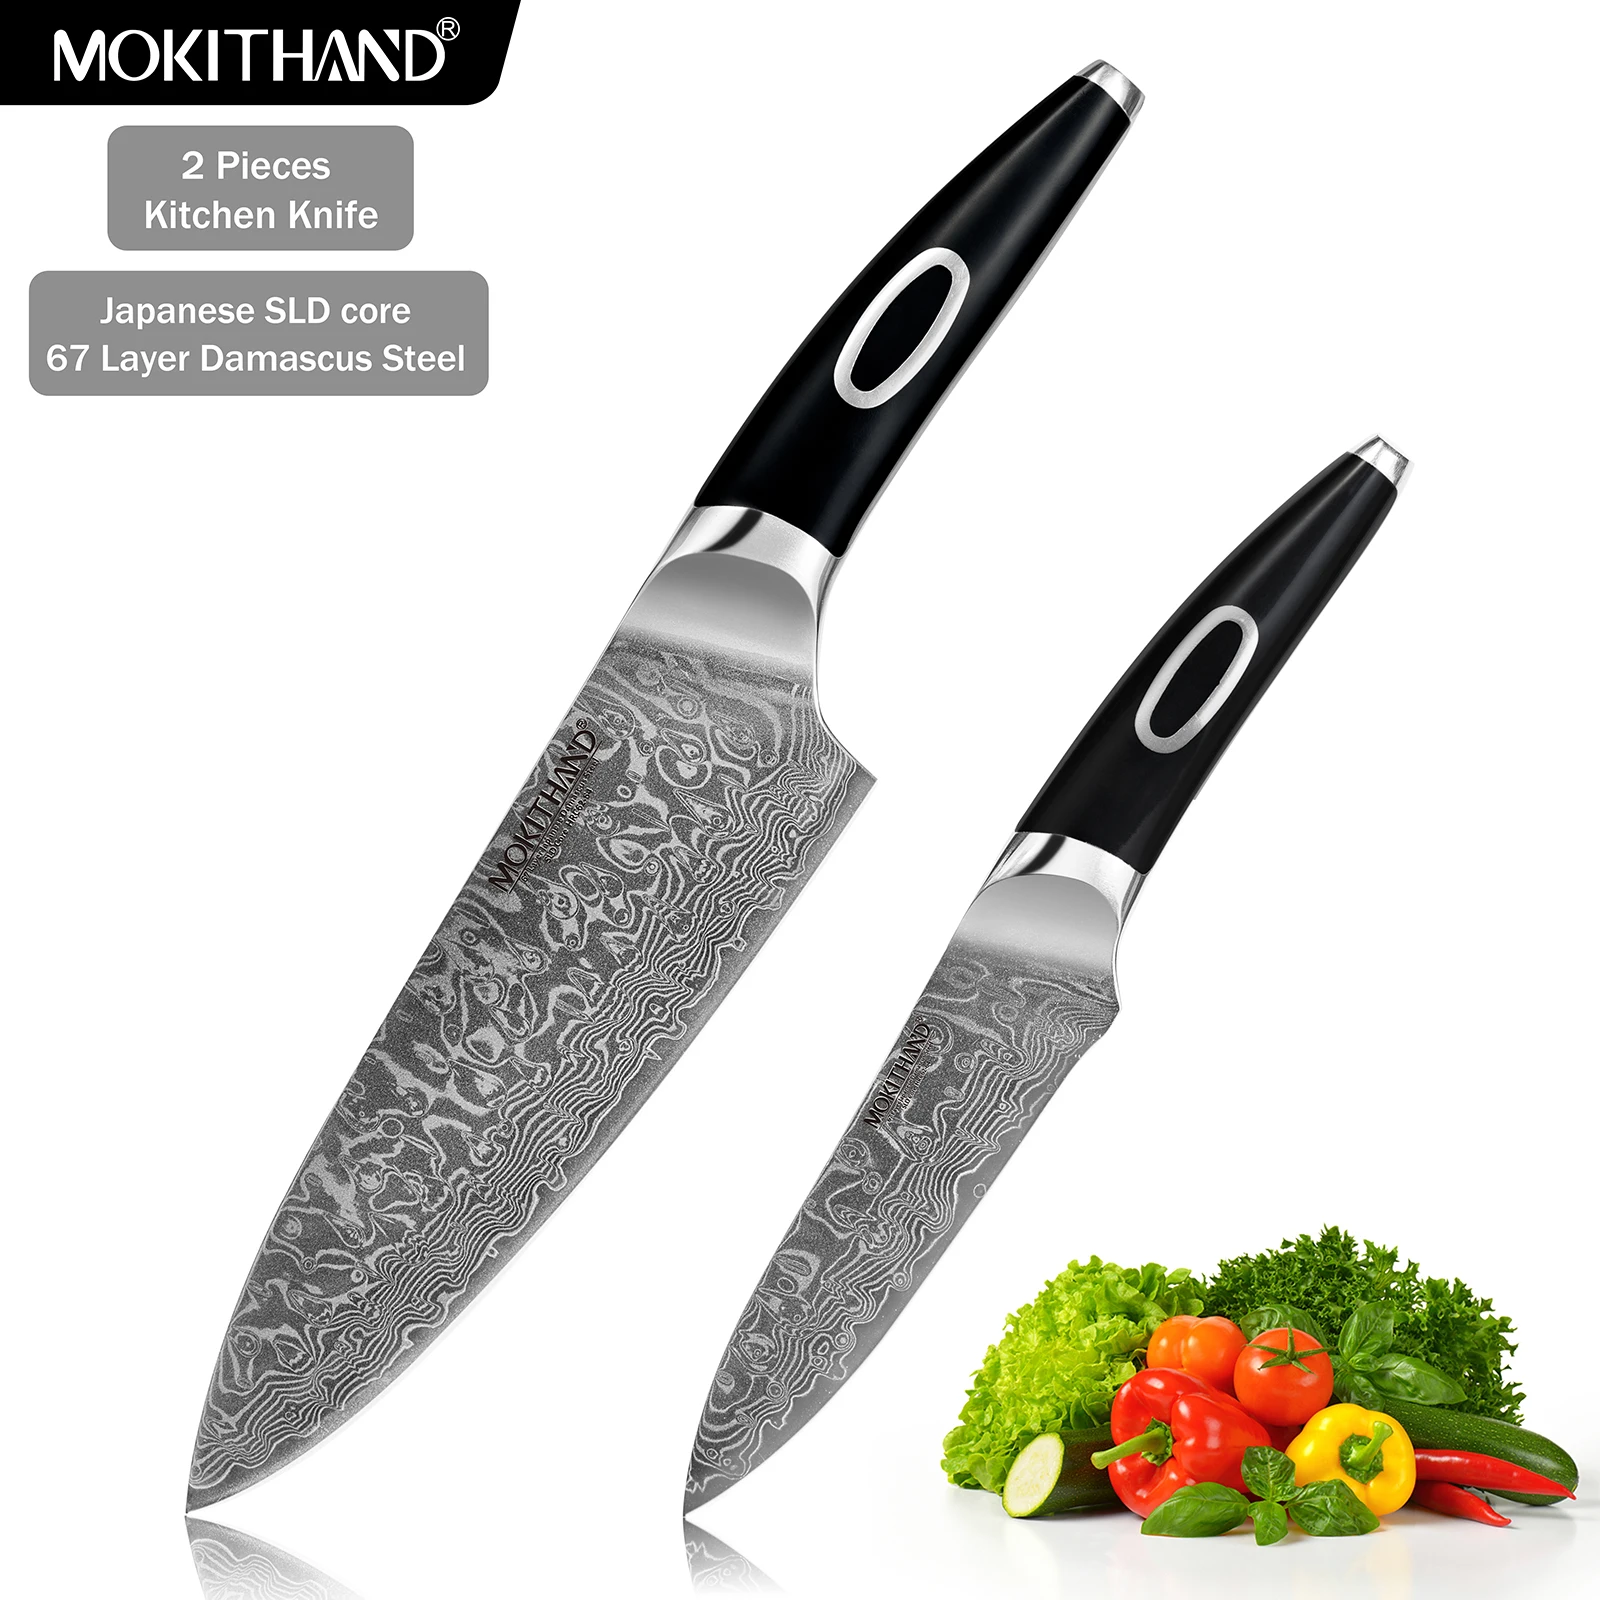 2pcs Damascus Chef Knife Sharp Kitchen Knives 67 Layer Japanese SLD Core Professional Utility Meat Fruit Fish Cooking Knife